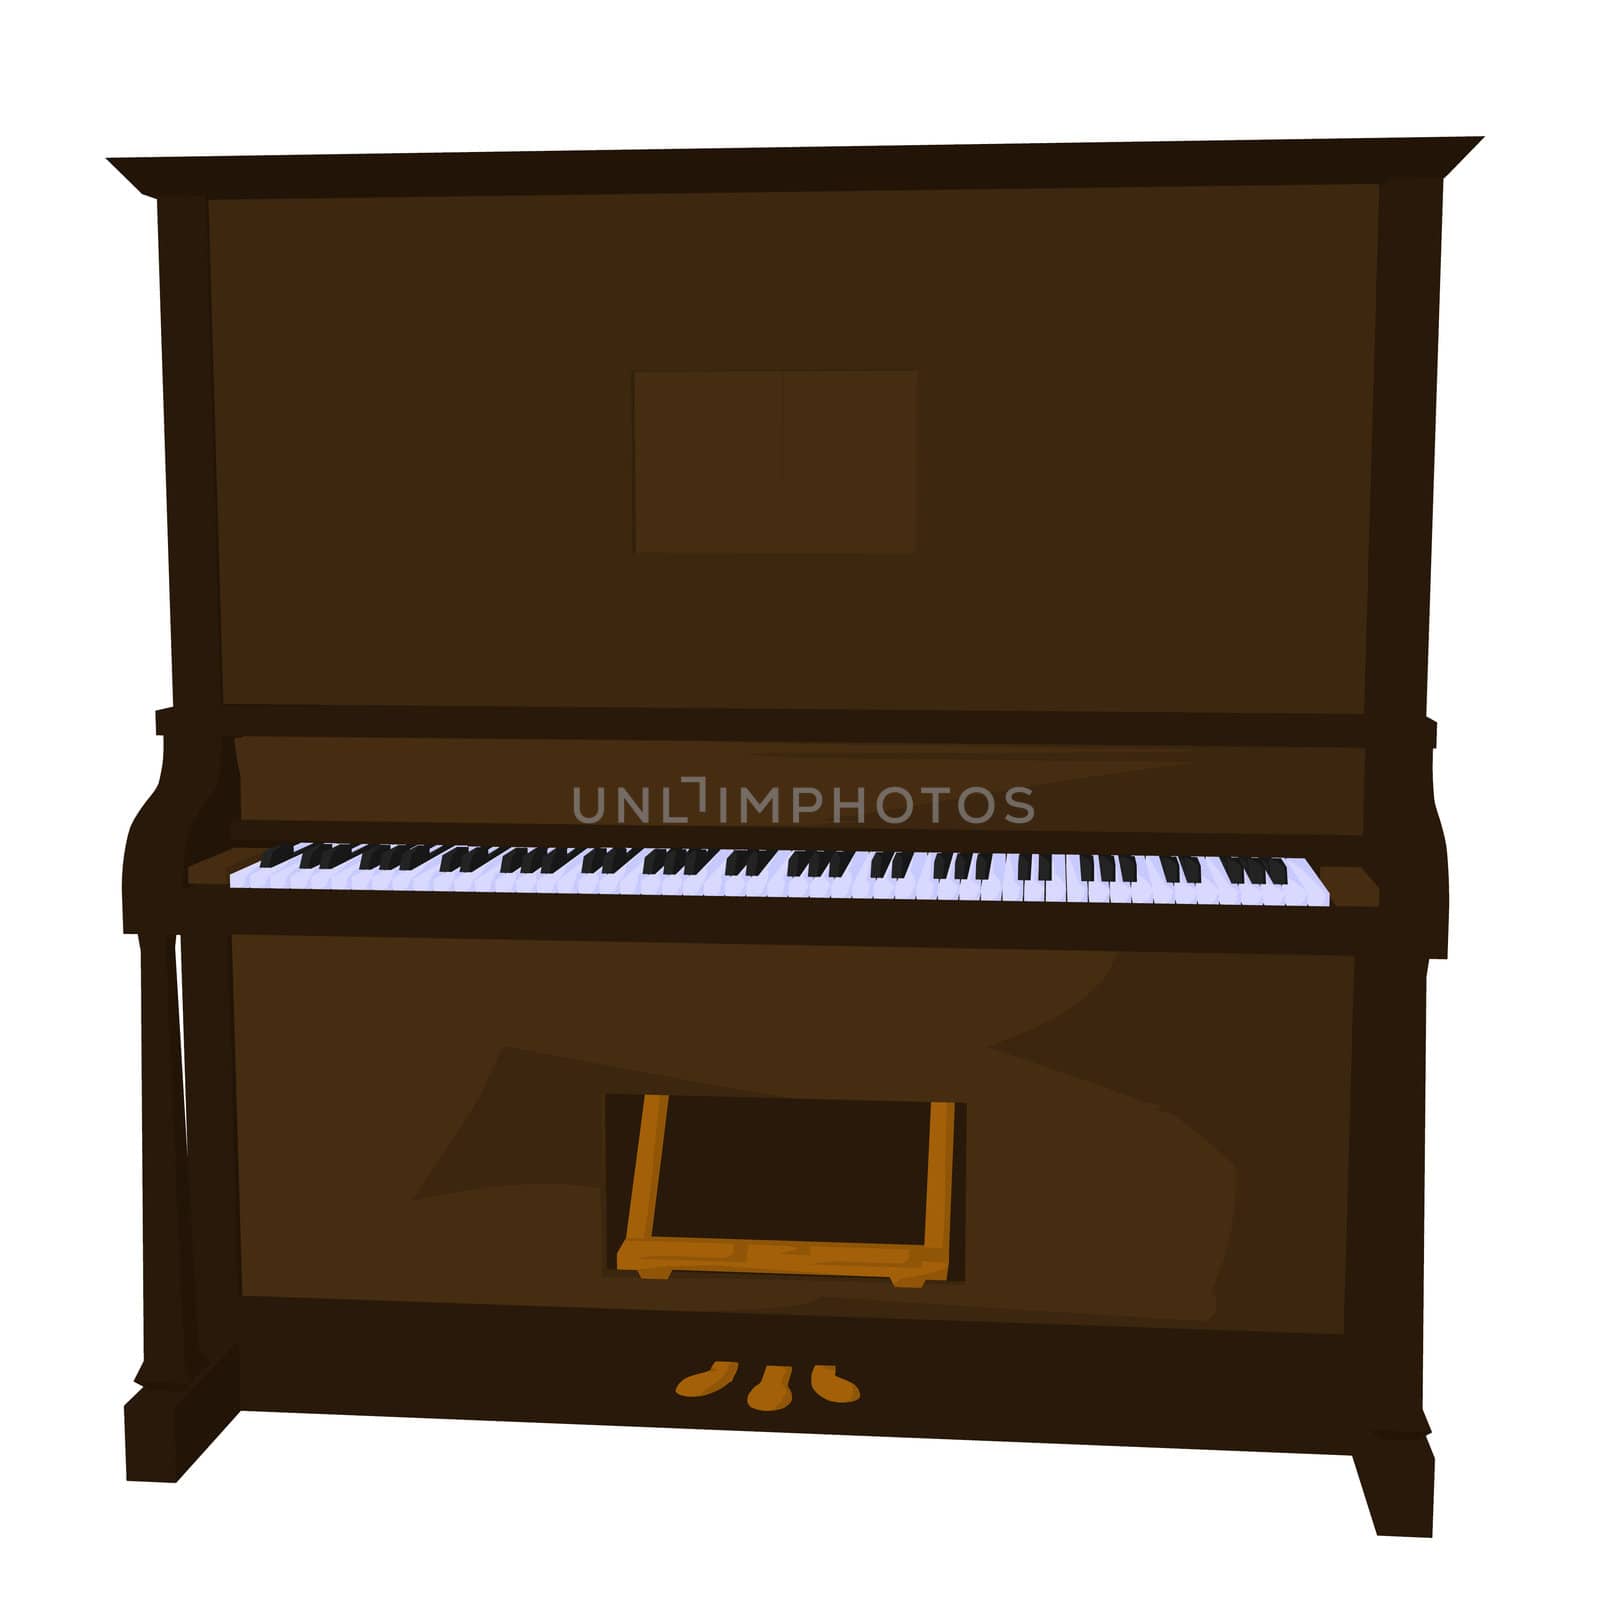 Illustration of a piano on a white background